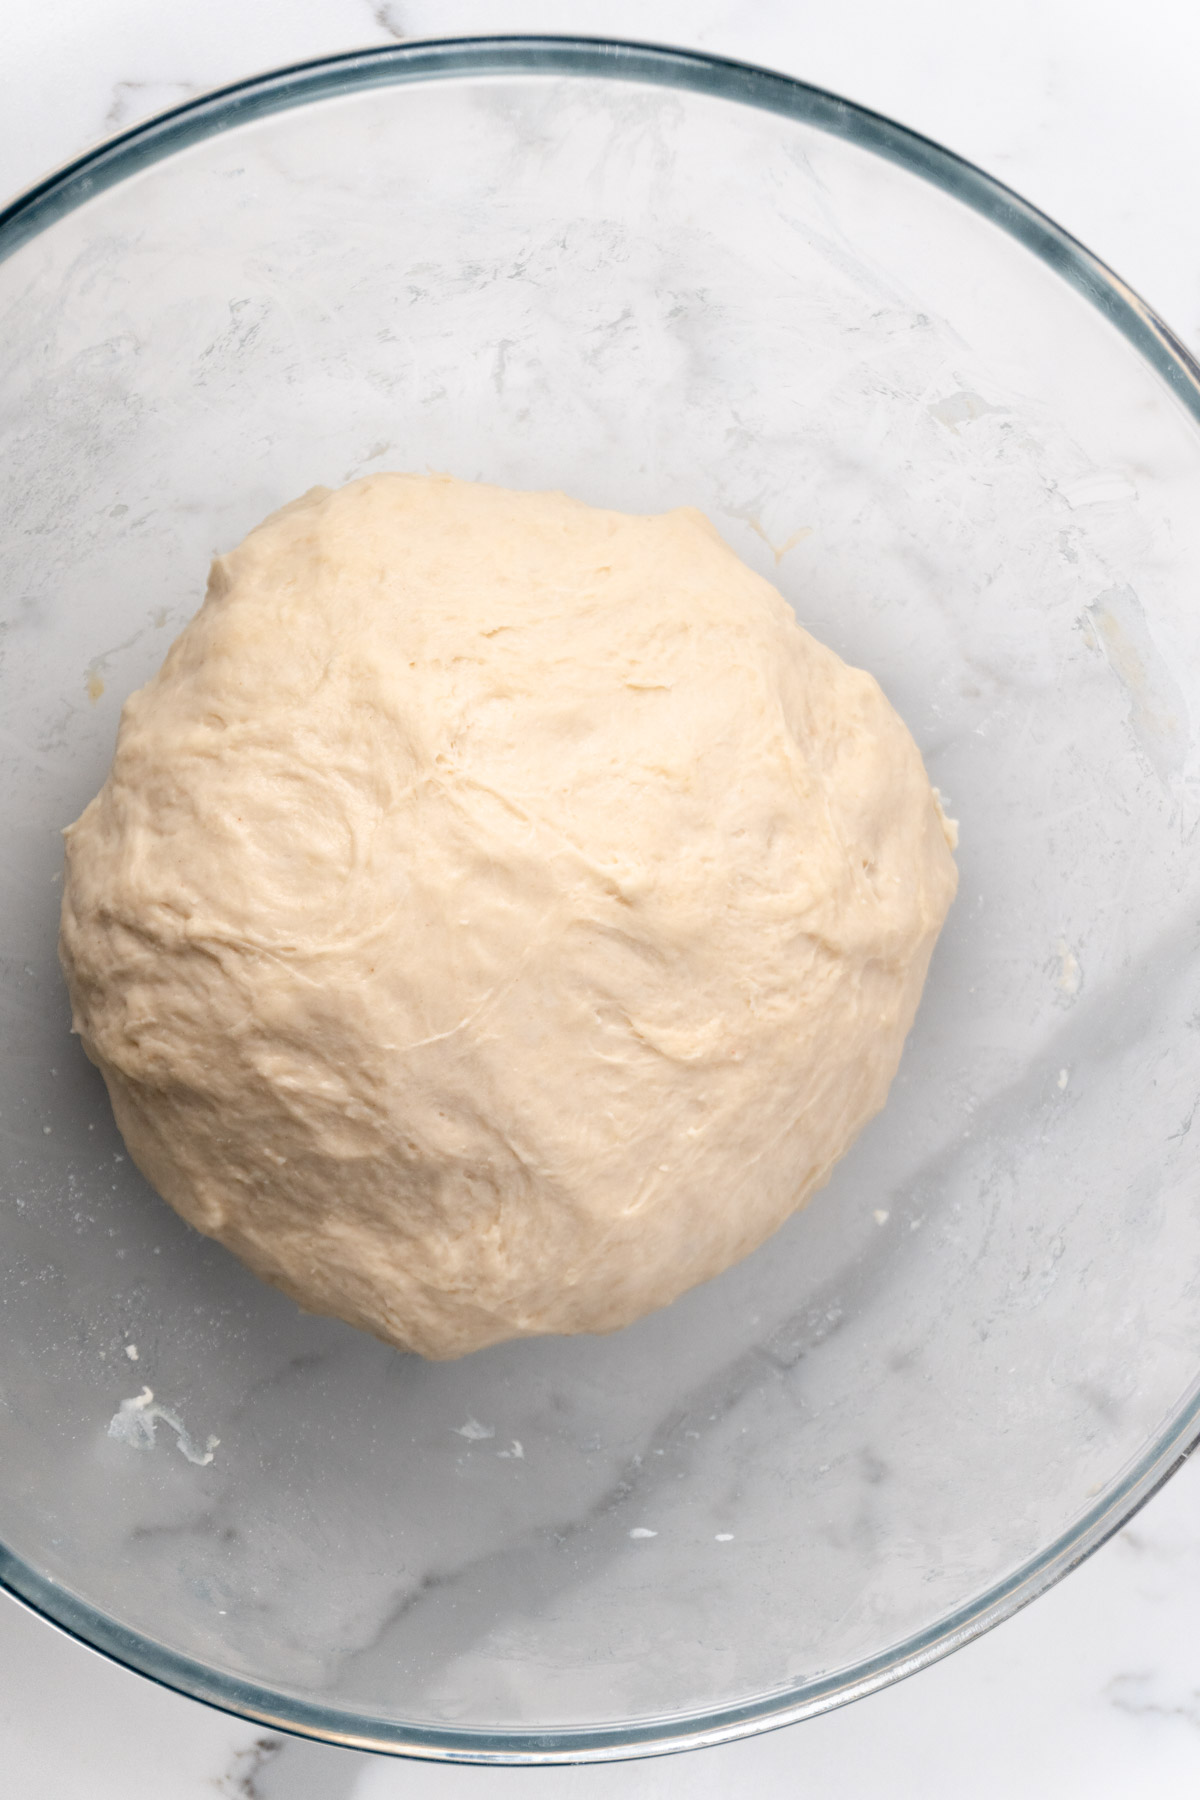 basic pizza dough in a glass bowl